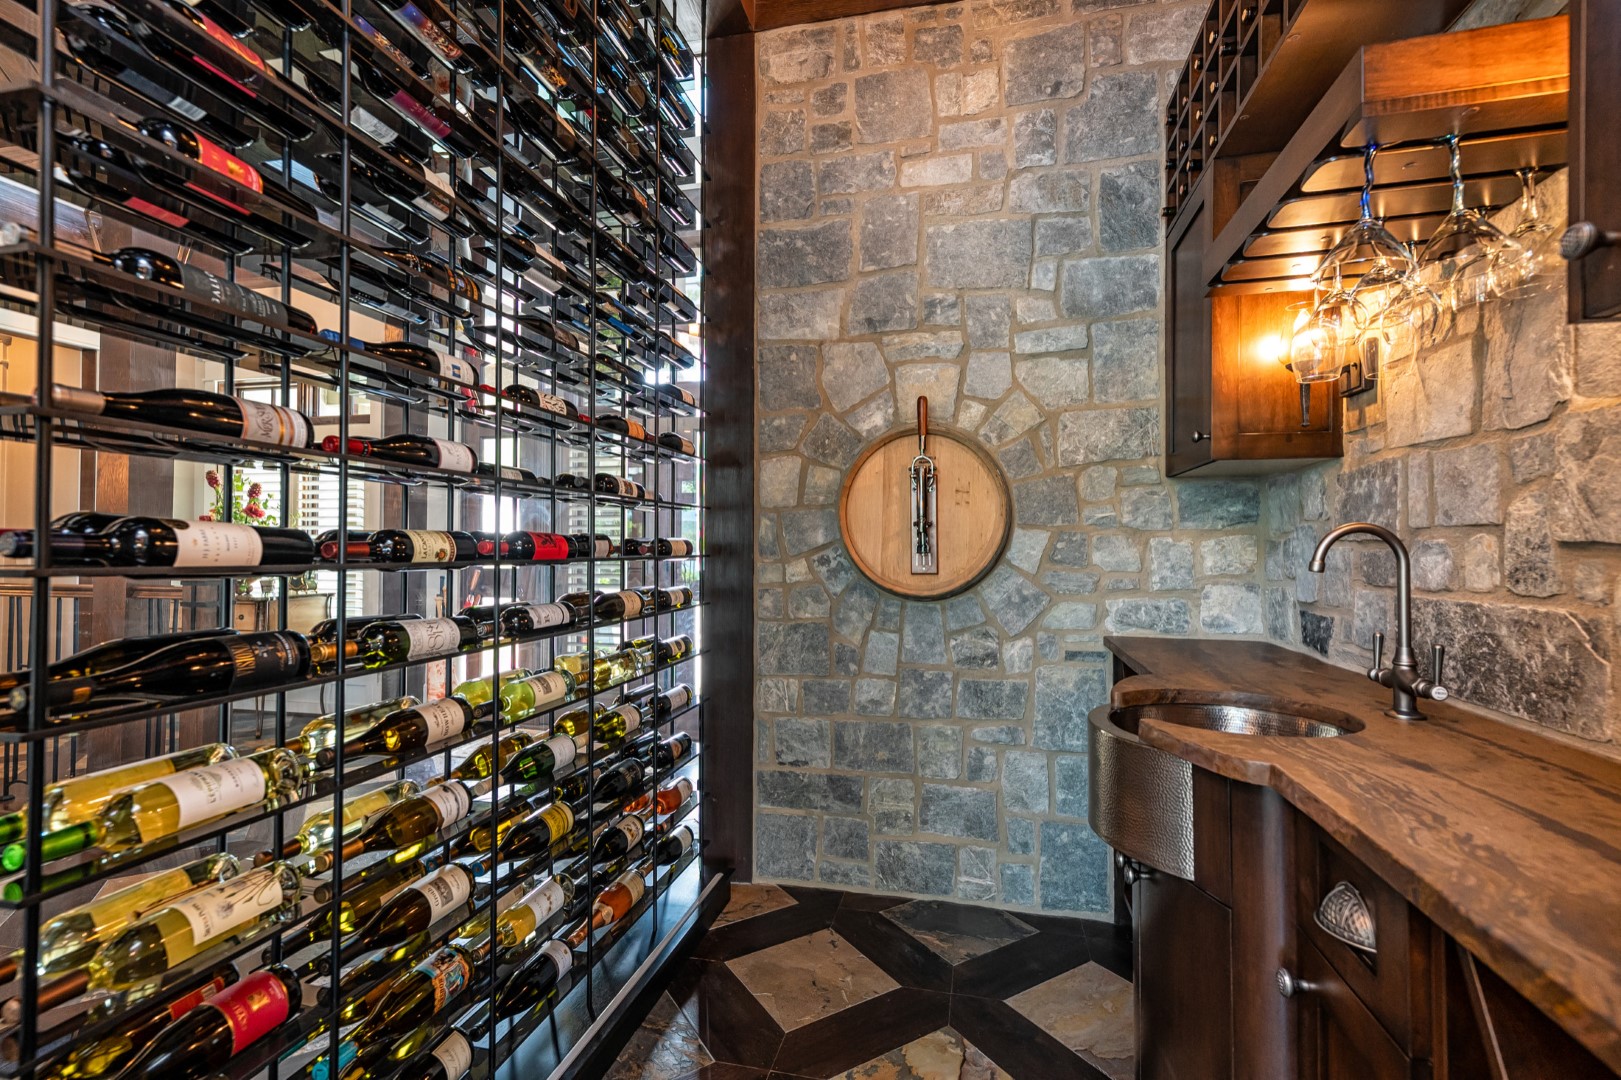 15 Sophisticated Rustic Wine Cellar Designs For Your Mountain Cabin